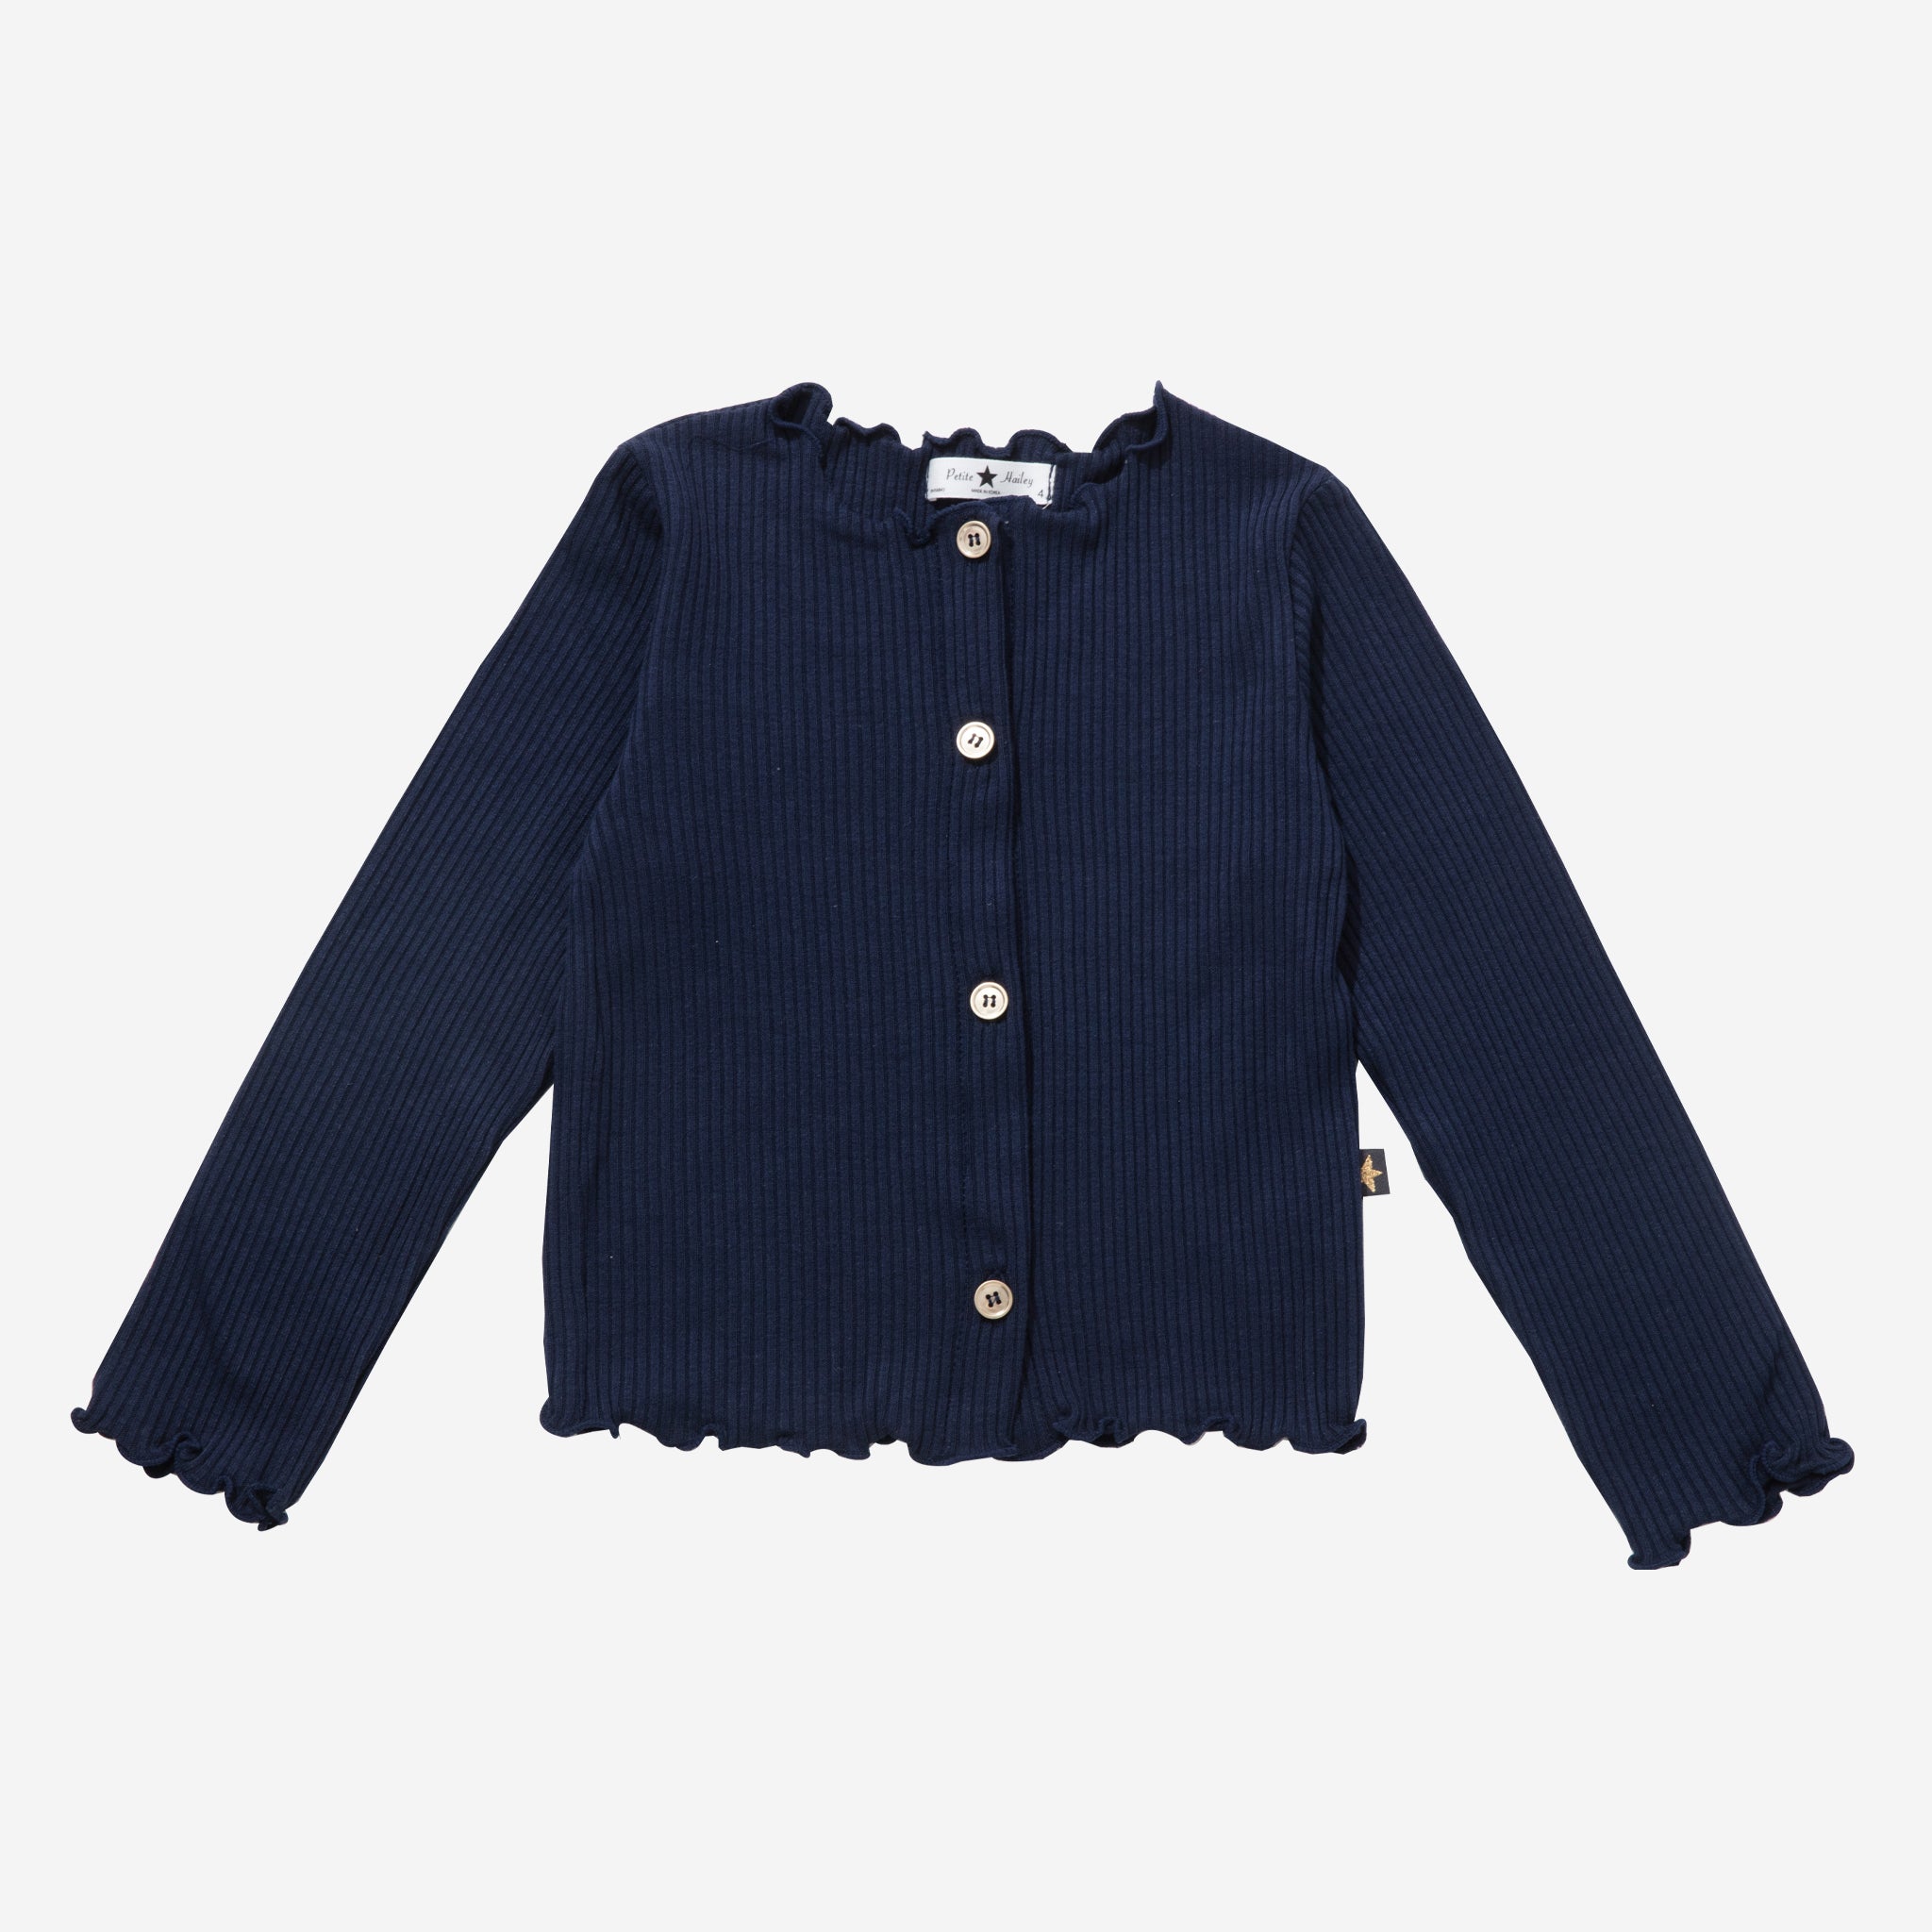 Navy, long sleeve cardigan with simple buttons.